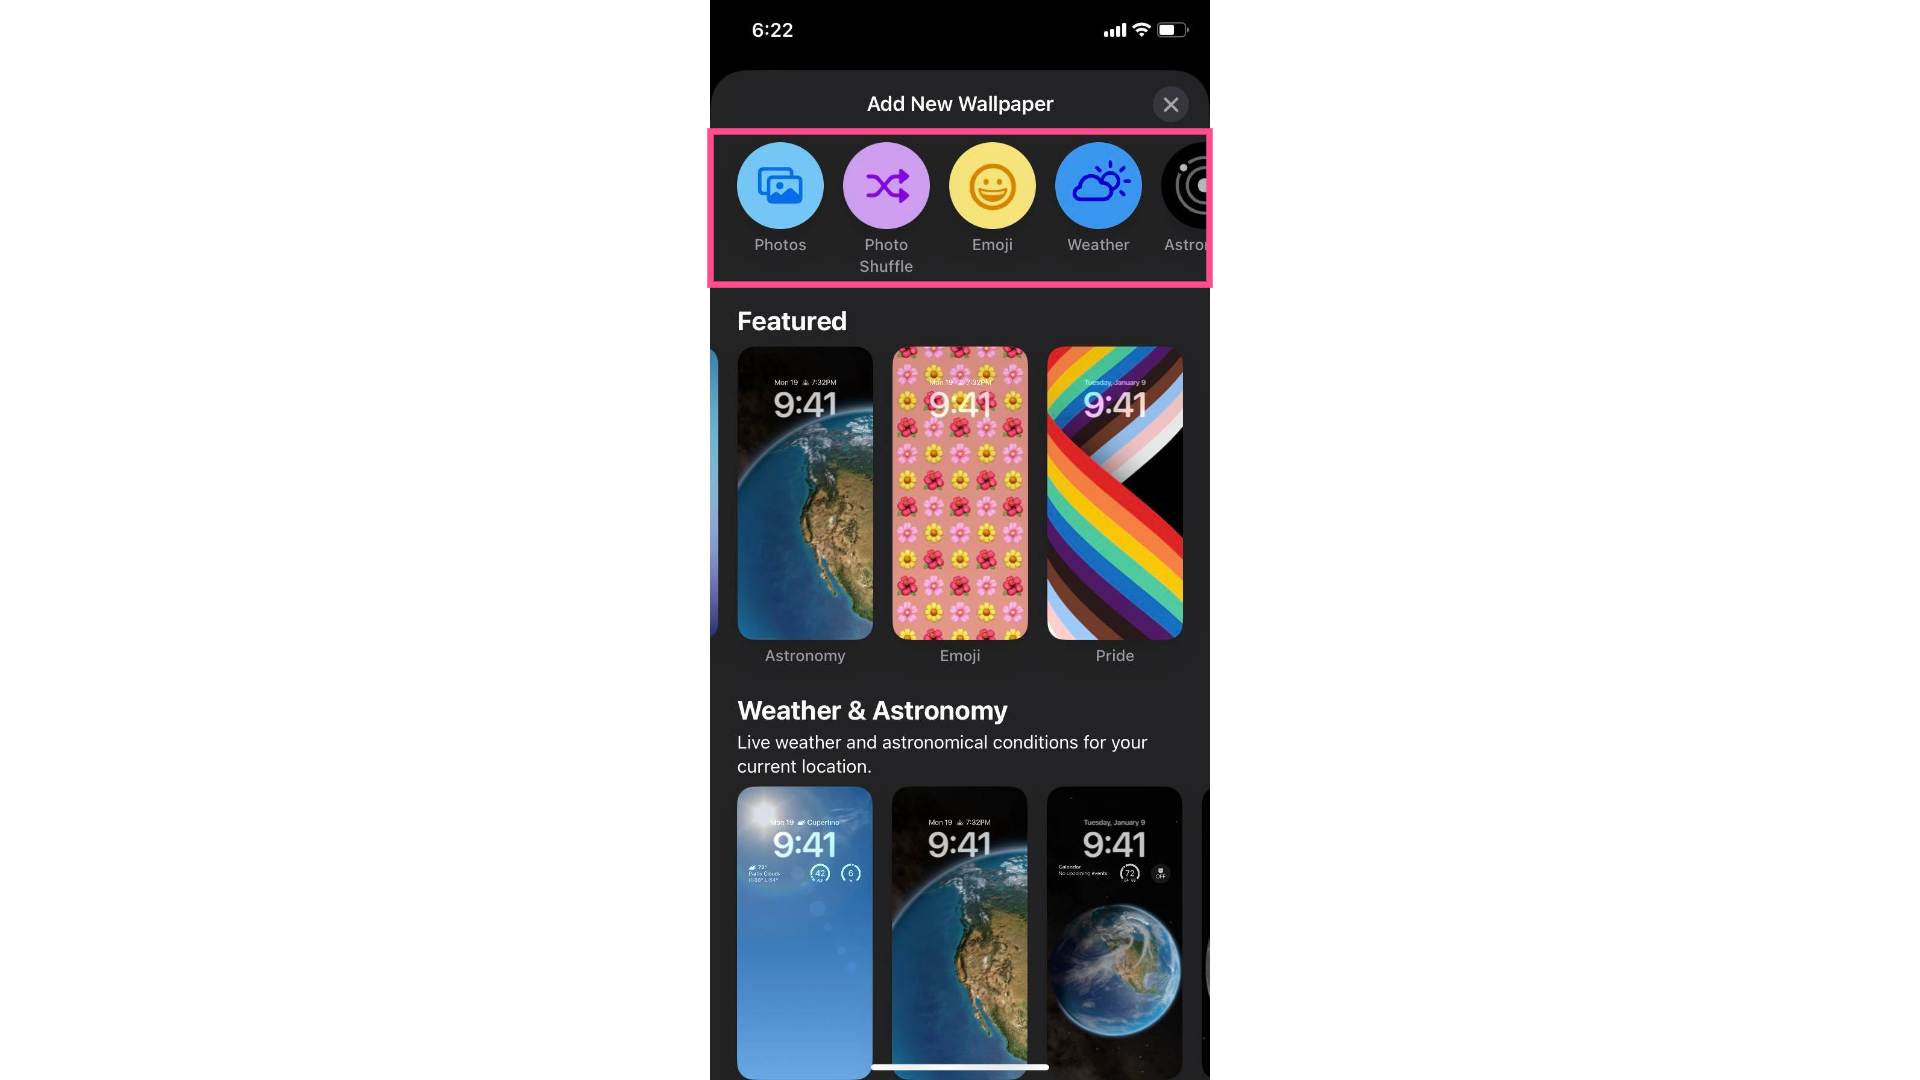 A screenshot showing the different layouts and premade wallpaper designs in iOS 16